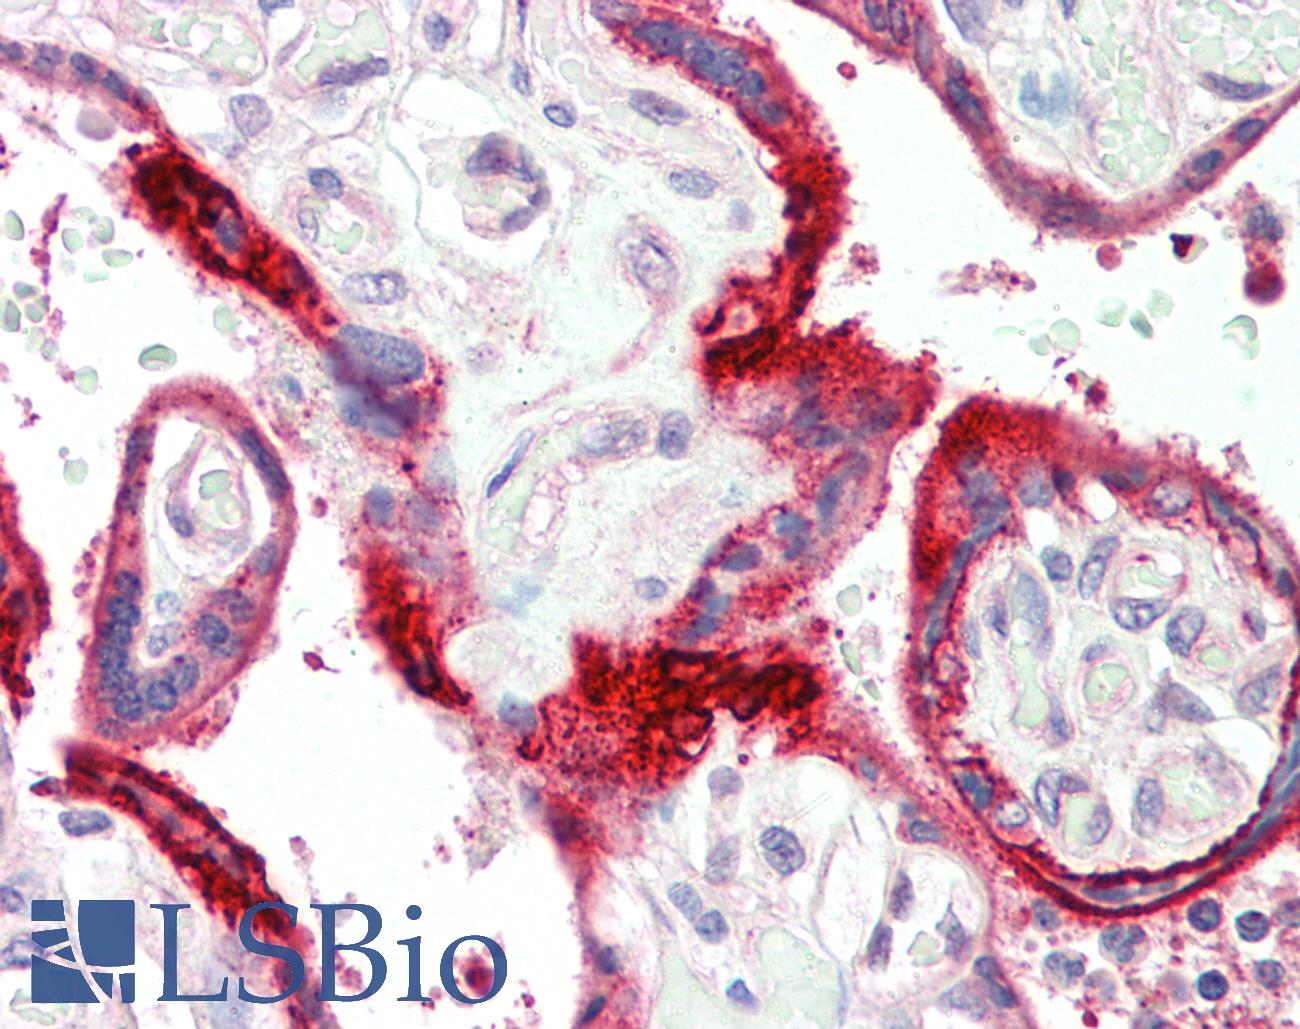 C11orf2 / Fat-Free Antibody - Anti-C11orf2 / Fat-Free antibody IHC staining of human placenta. Immunohistochemistry of formalin-fixed, paraffin-embedded tissue after heat-induced antigen retrieval.